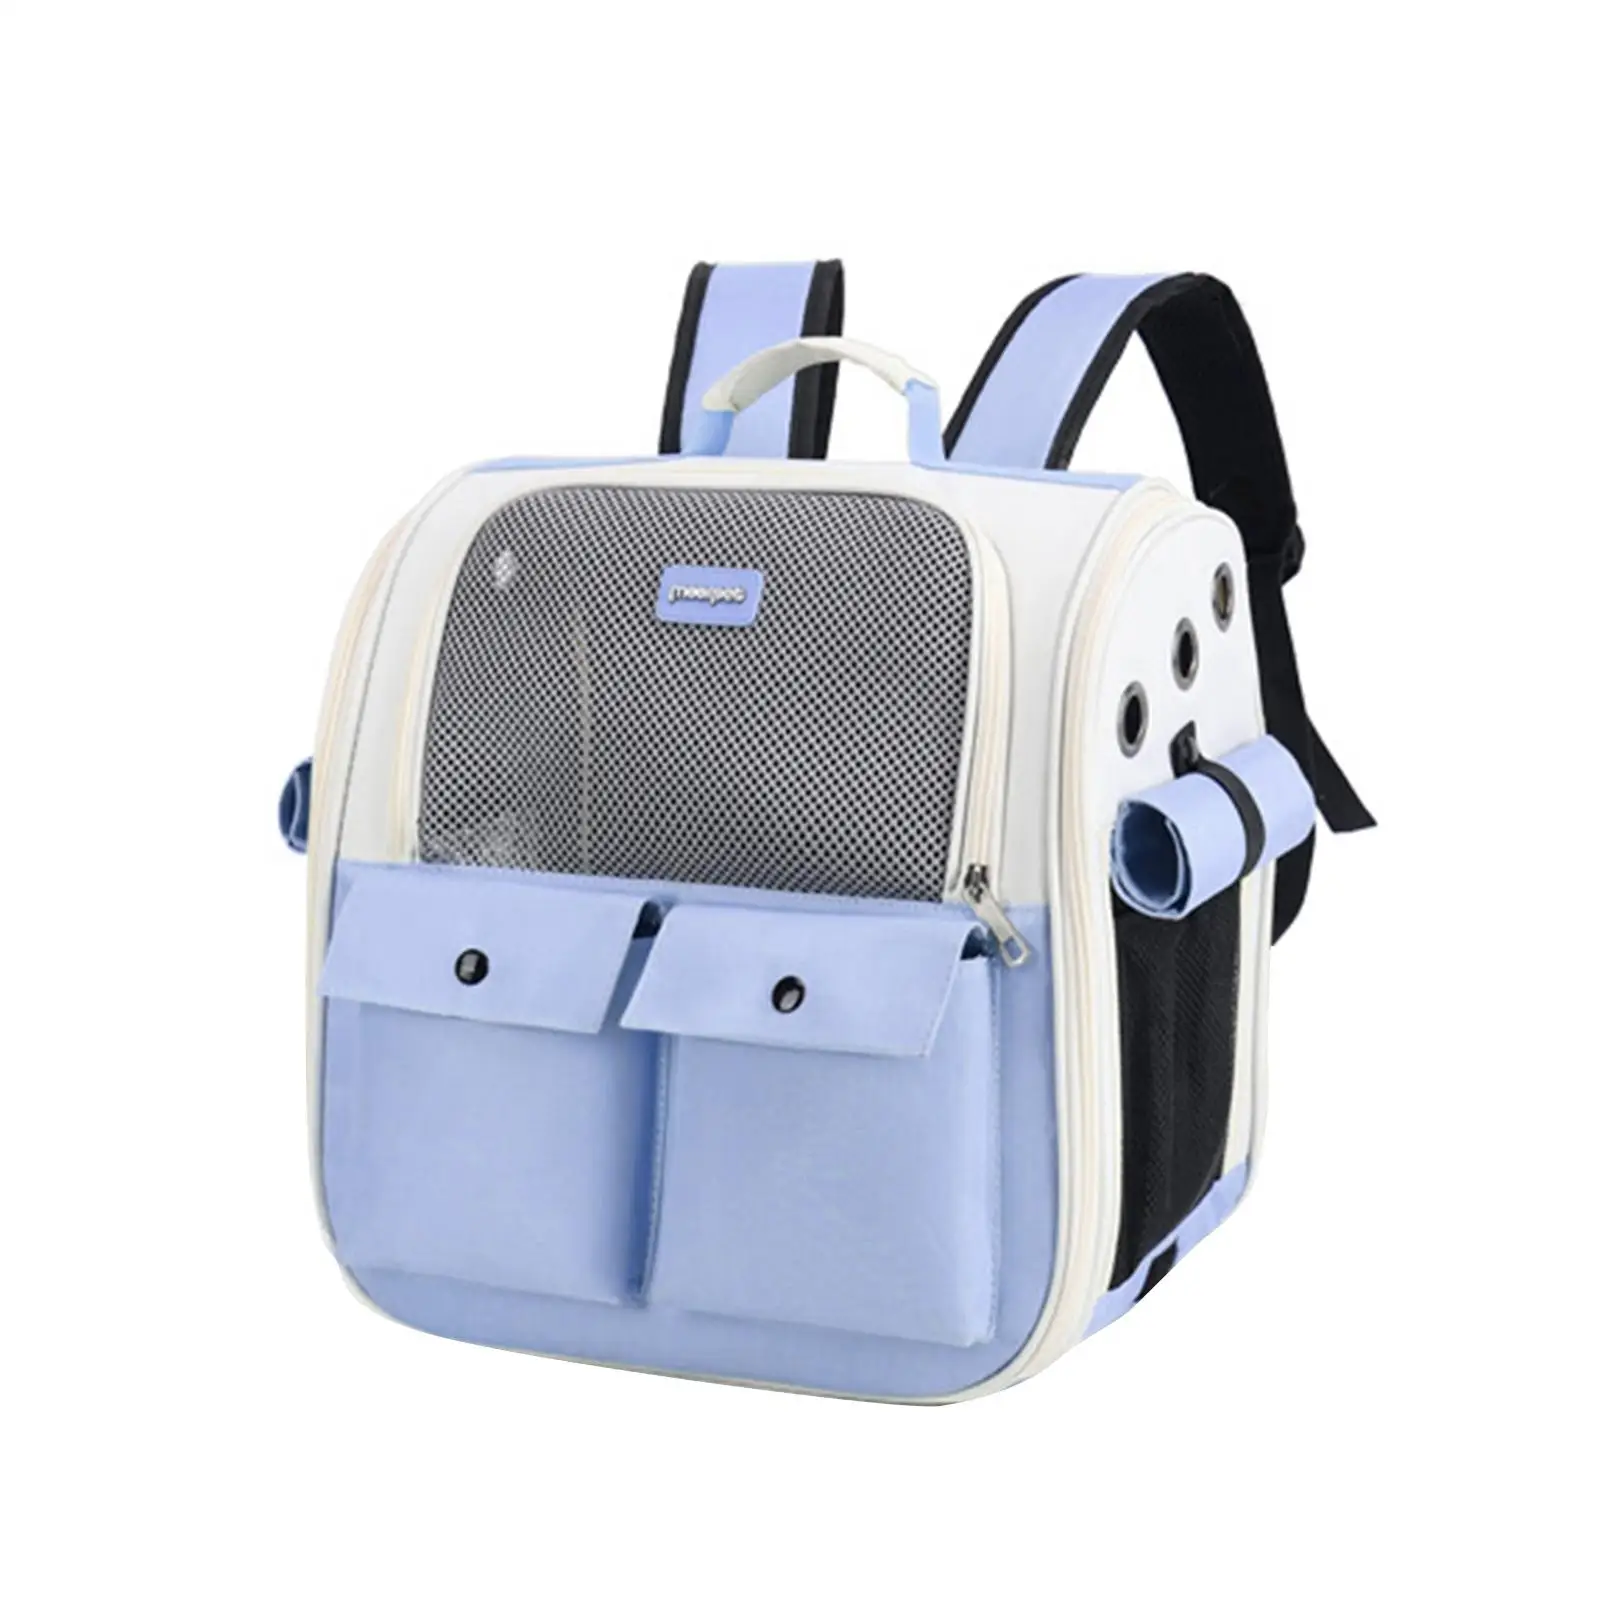 Pet Cat Carrier Backpack Adjustable Strap Carrying Bag Ventilation High Capacity Foldable for Walking Outdoor Hiking